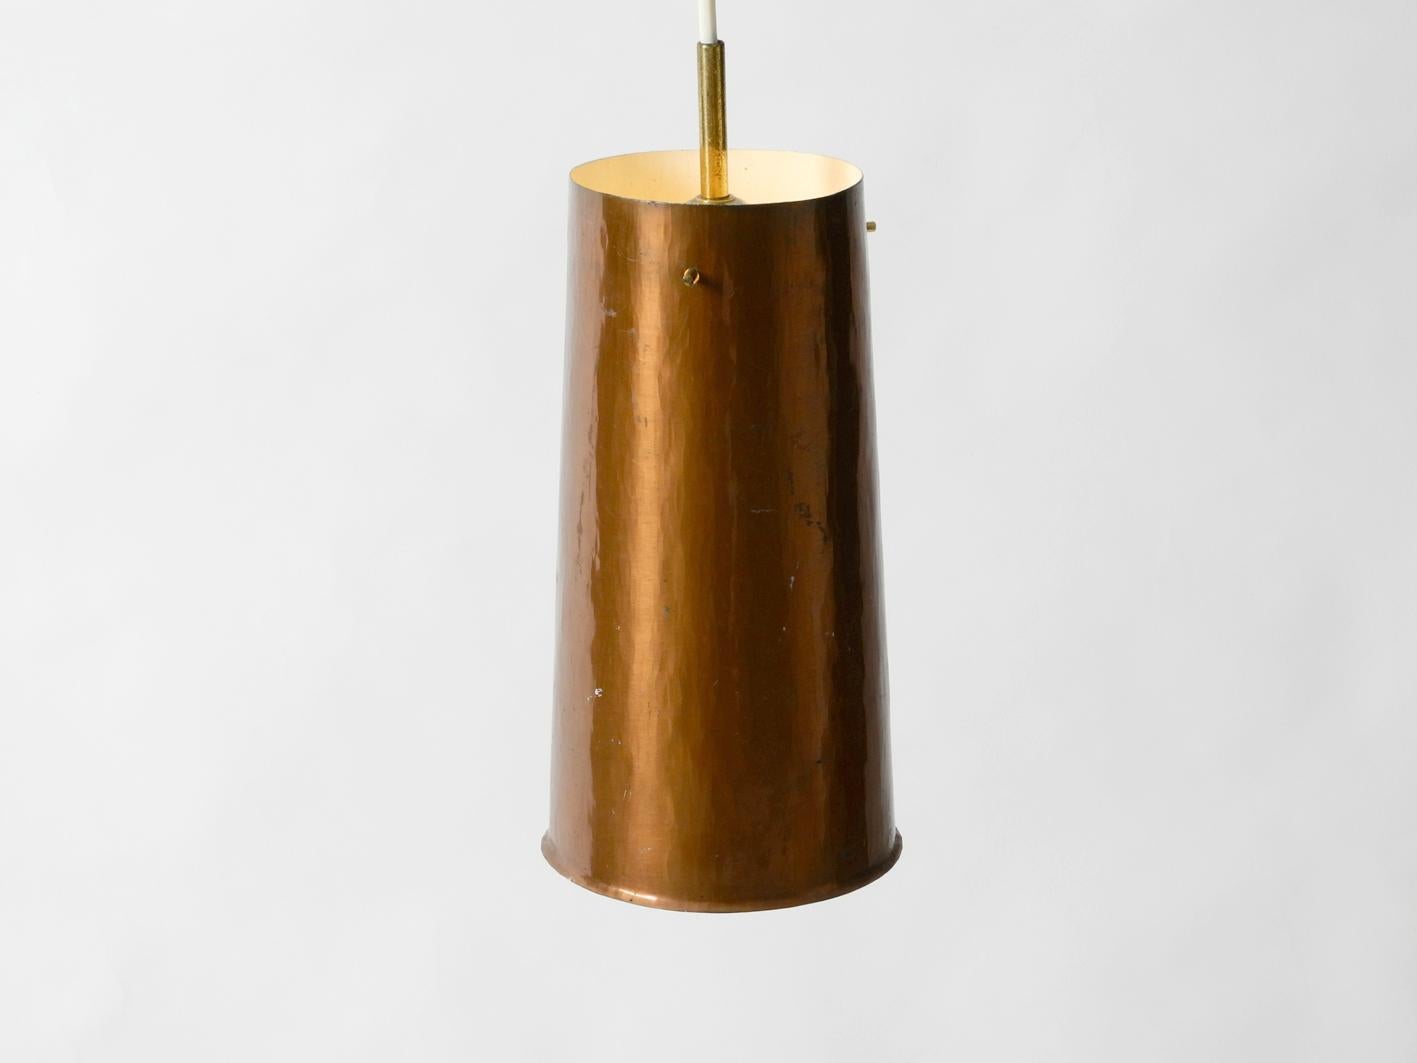 Beautiful Mid-Century Modern copper pendant lamp. Minimalistic 1950s cone design in very good original condition.
One original brass E27 socket. Very good vintage condition, no damages to the lamp, no bumps or dents. Great patina with very little